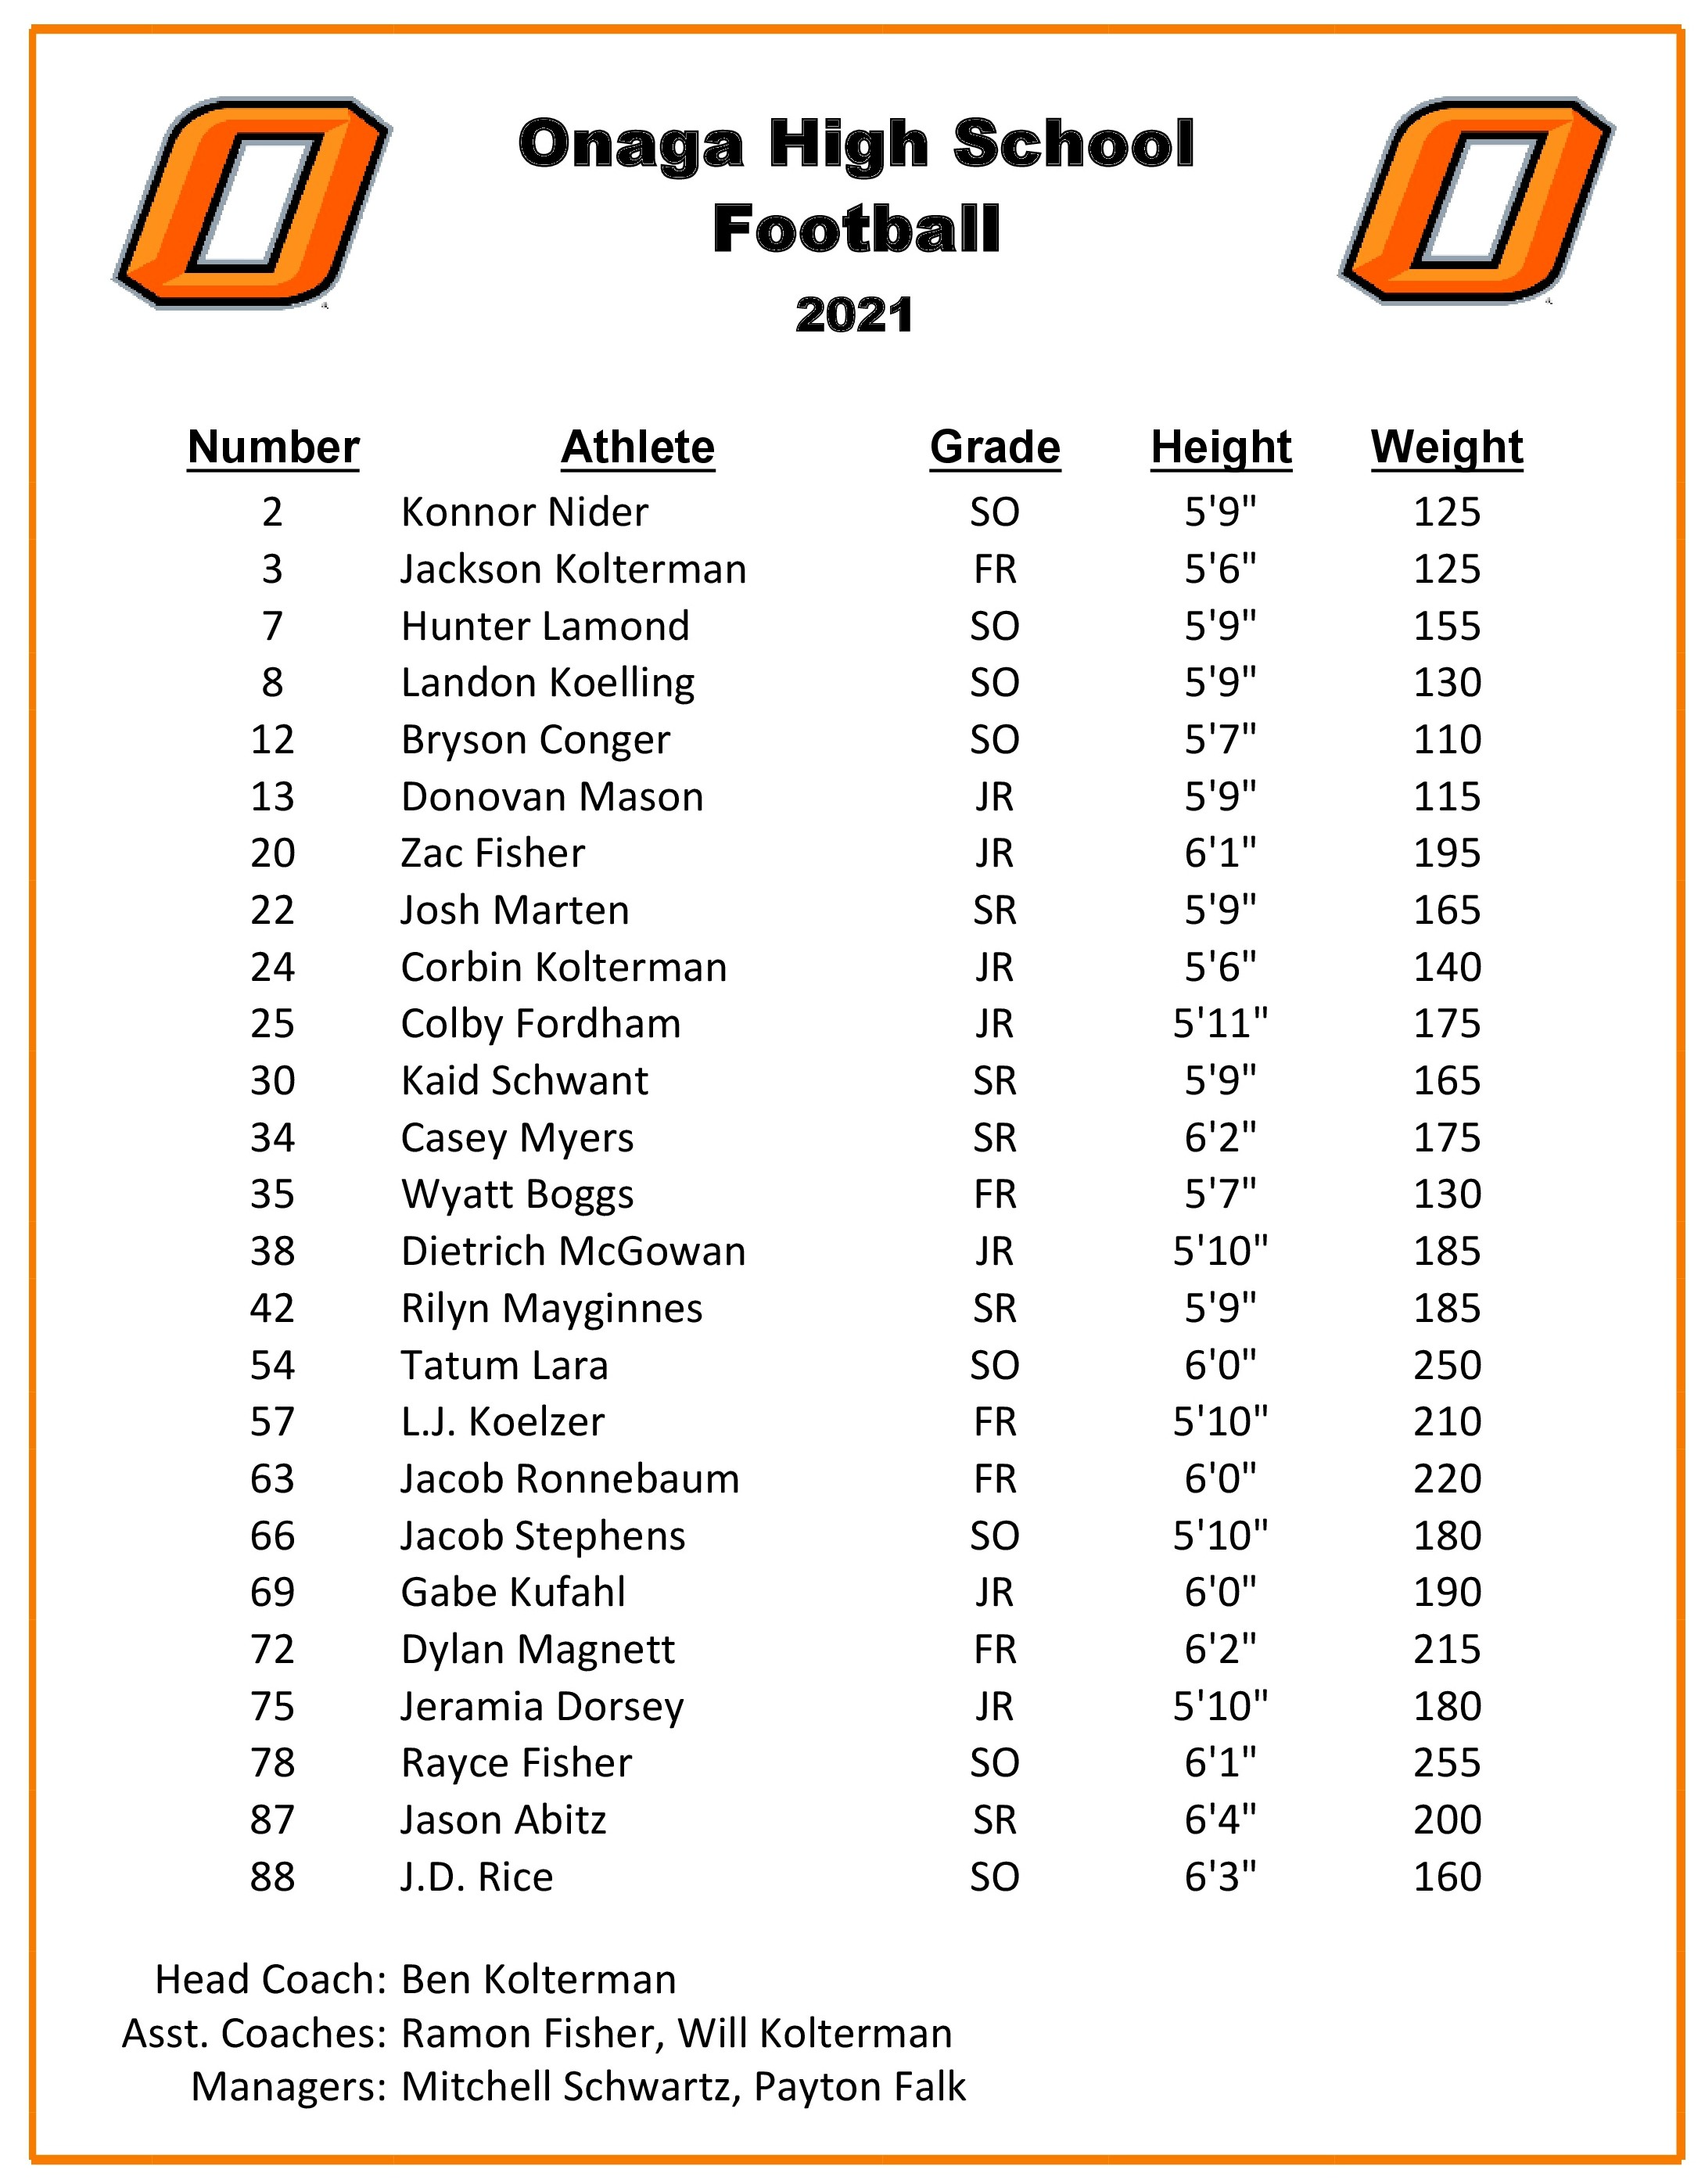 2021 HS Football Roster